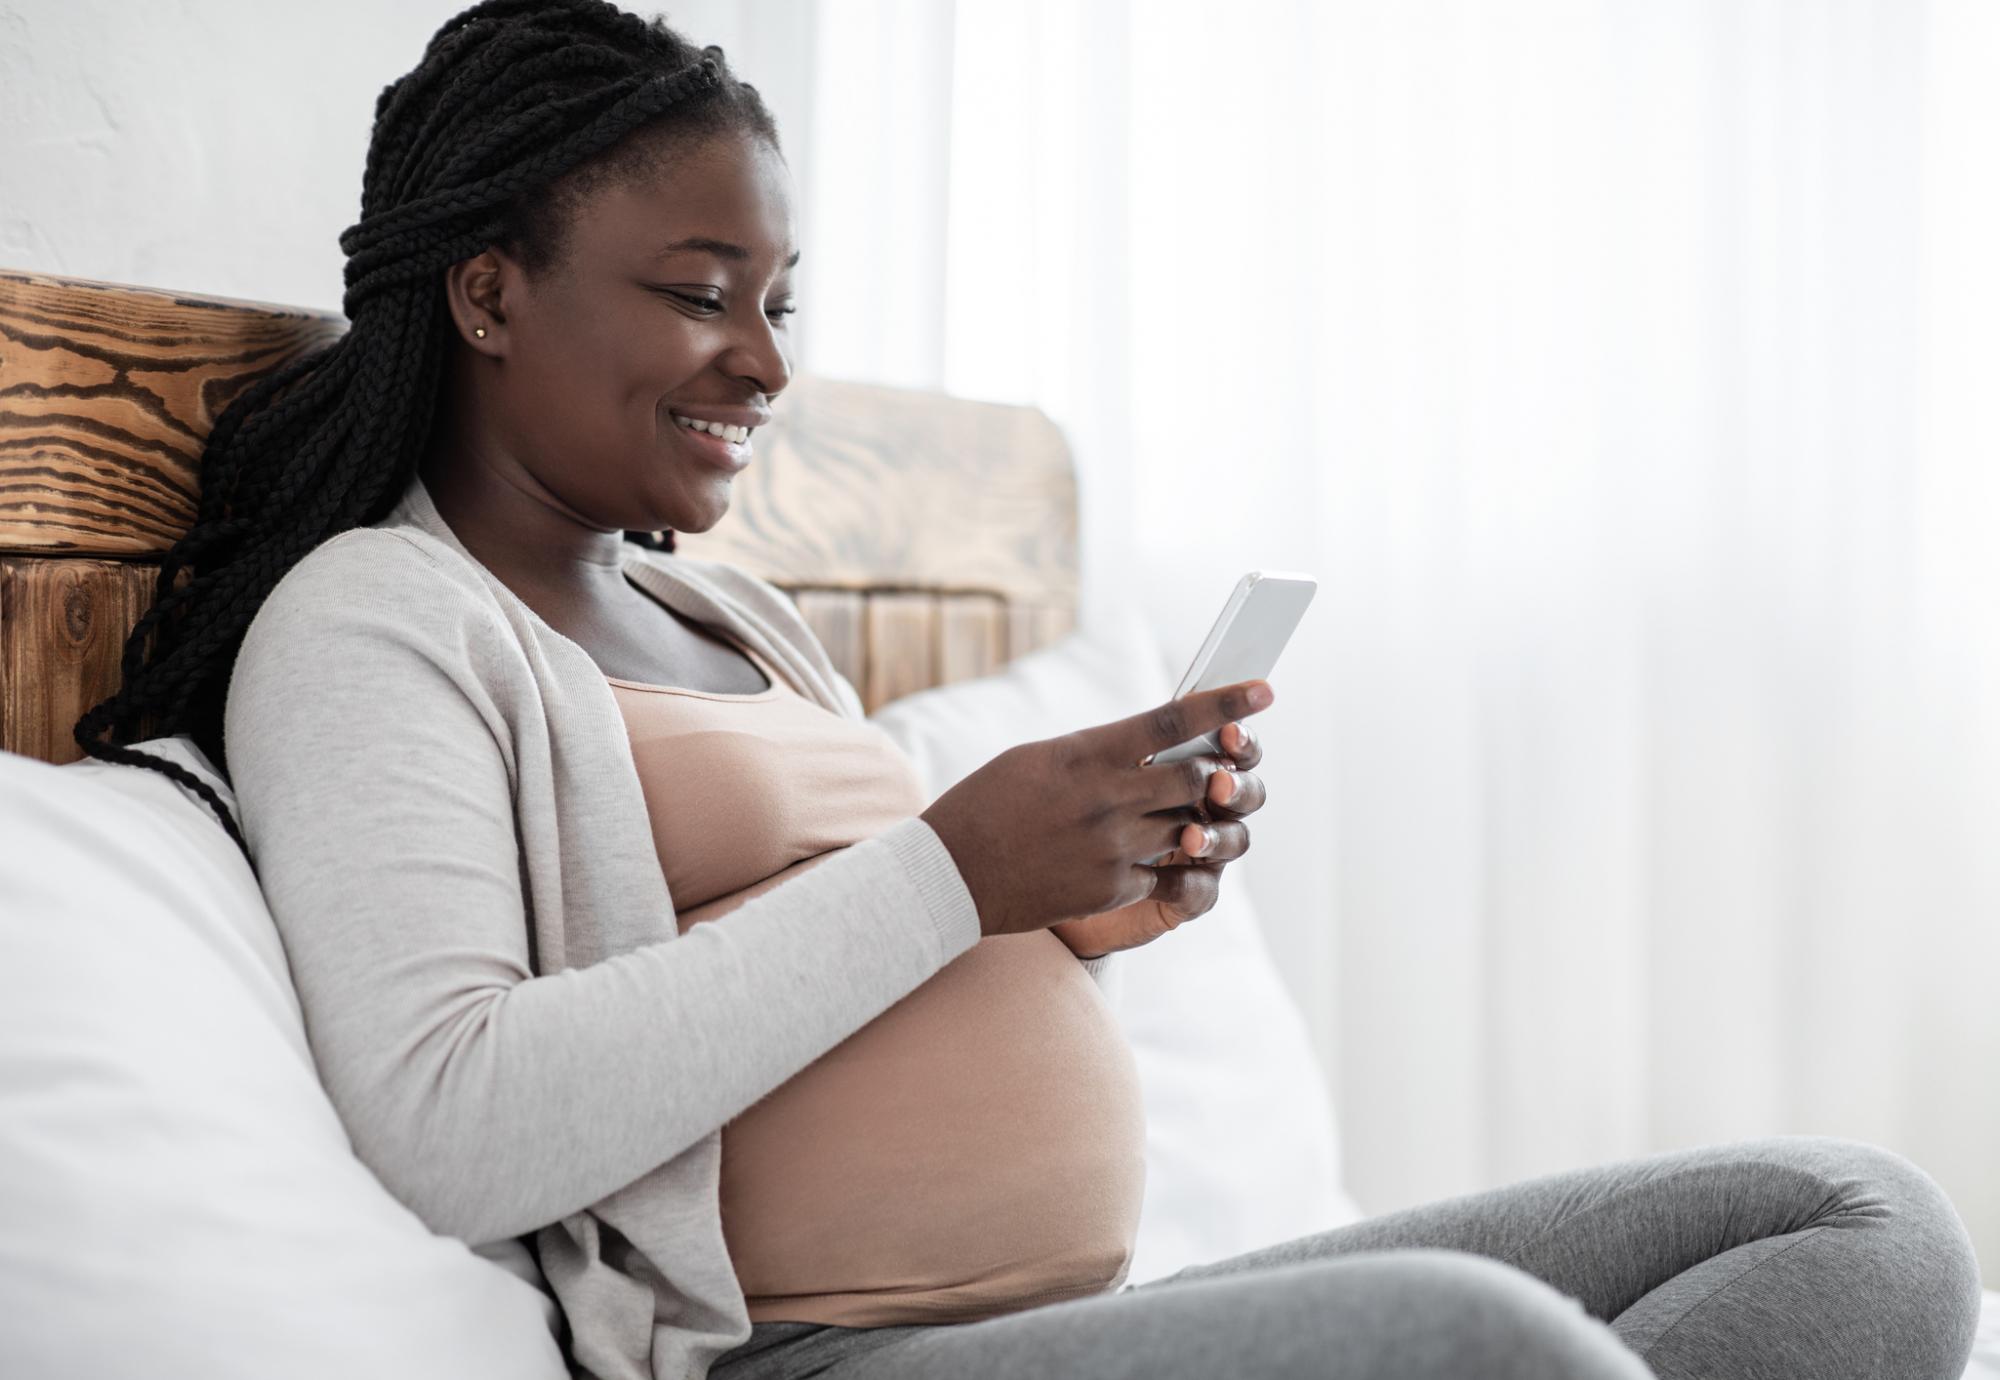 Pregnant woman using a mobile phone